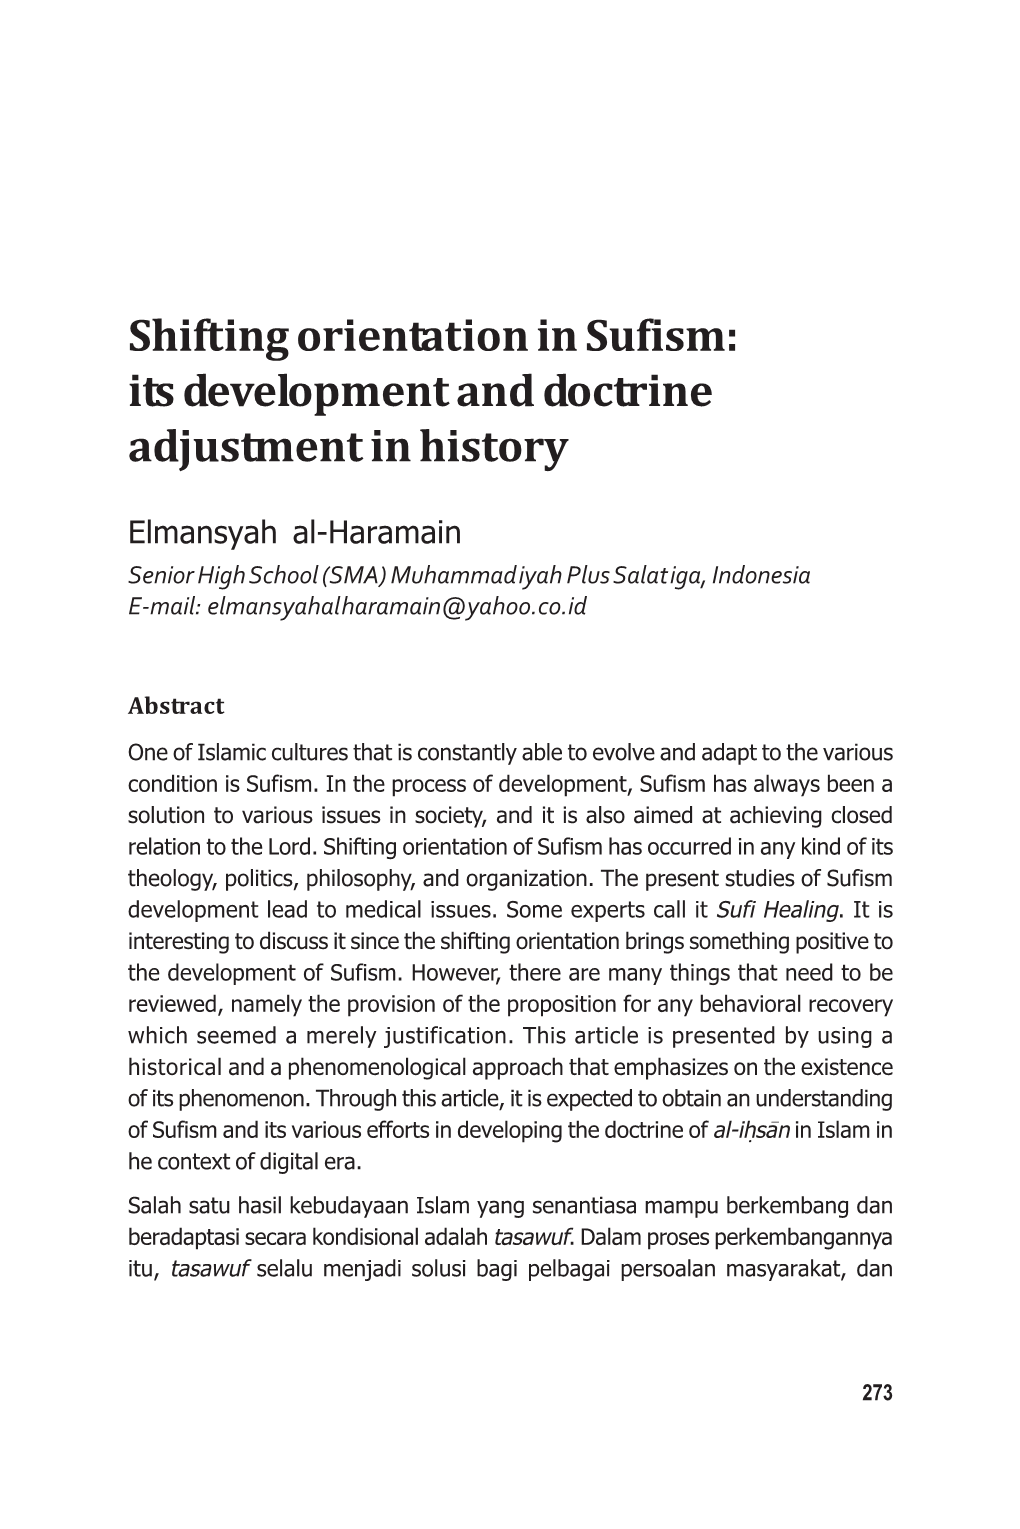 Shifting Orientation in Sufism: Its Development and Doctrine Adjustment in History